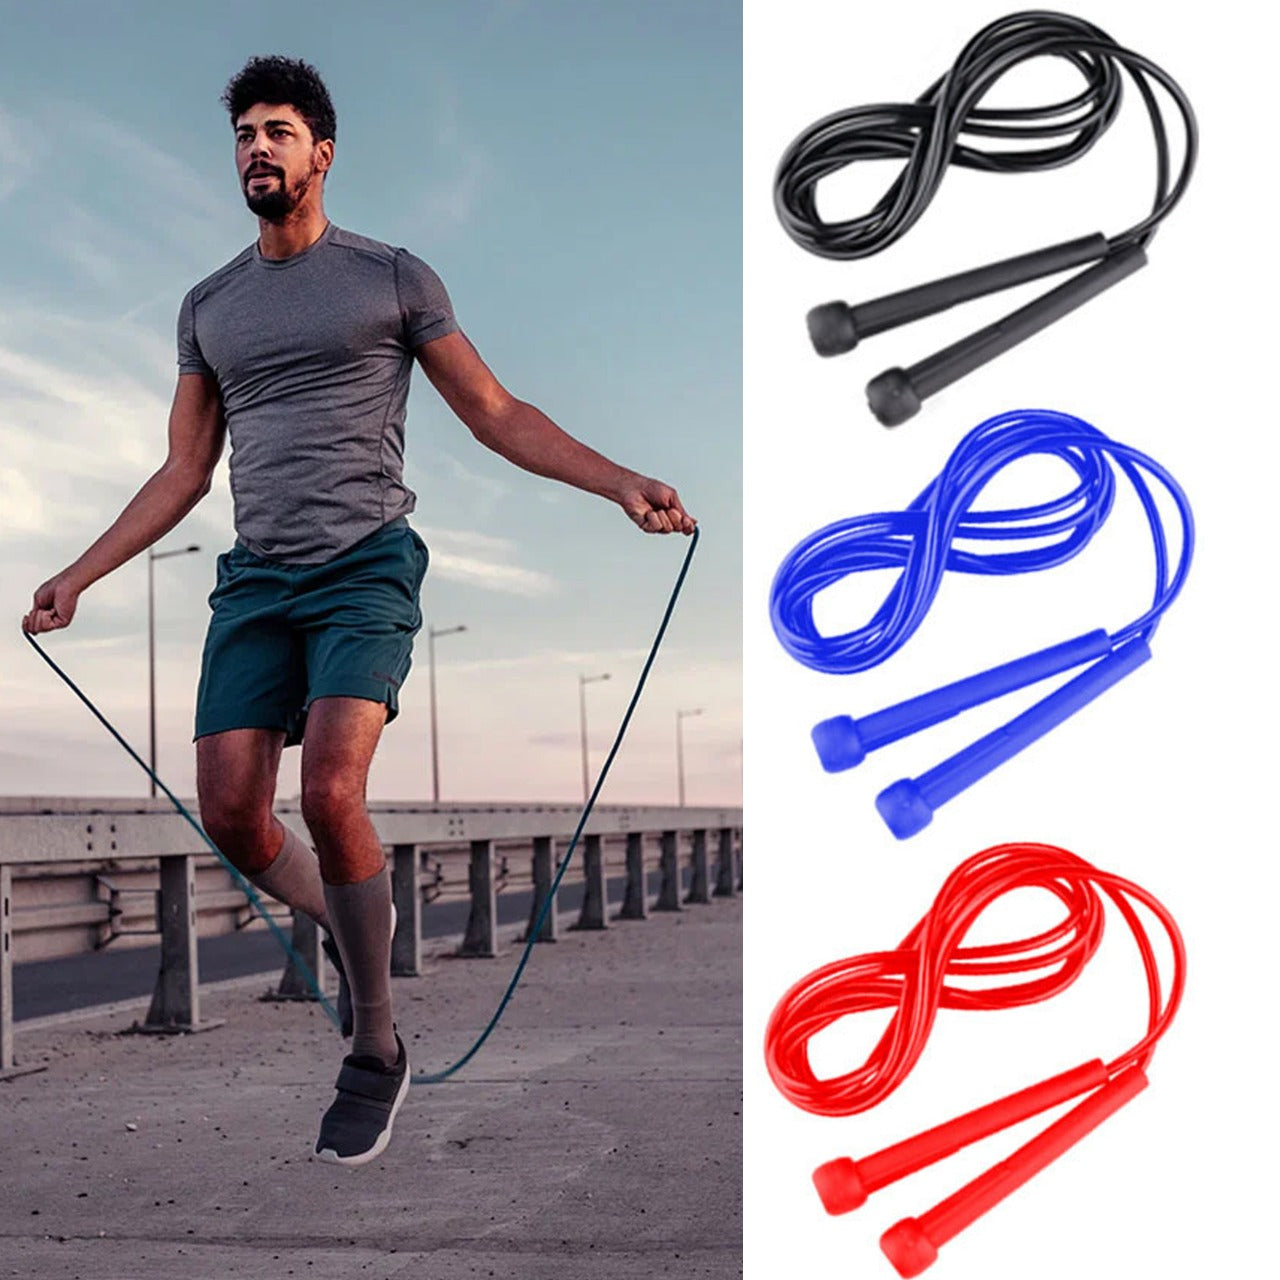 Jumping Ropes Nylon Repton Fitness and Boxing Gears